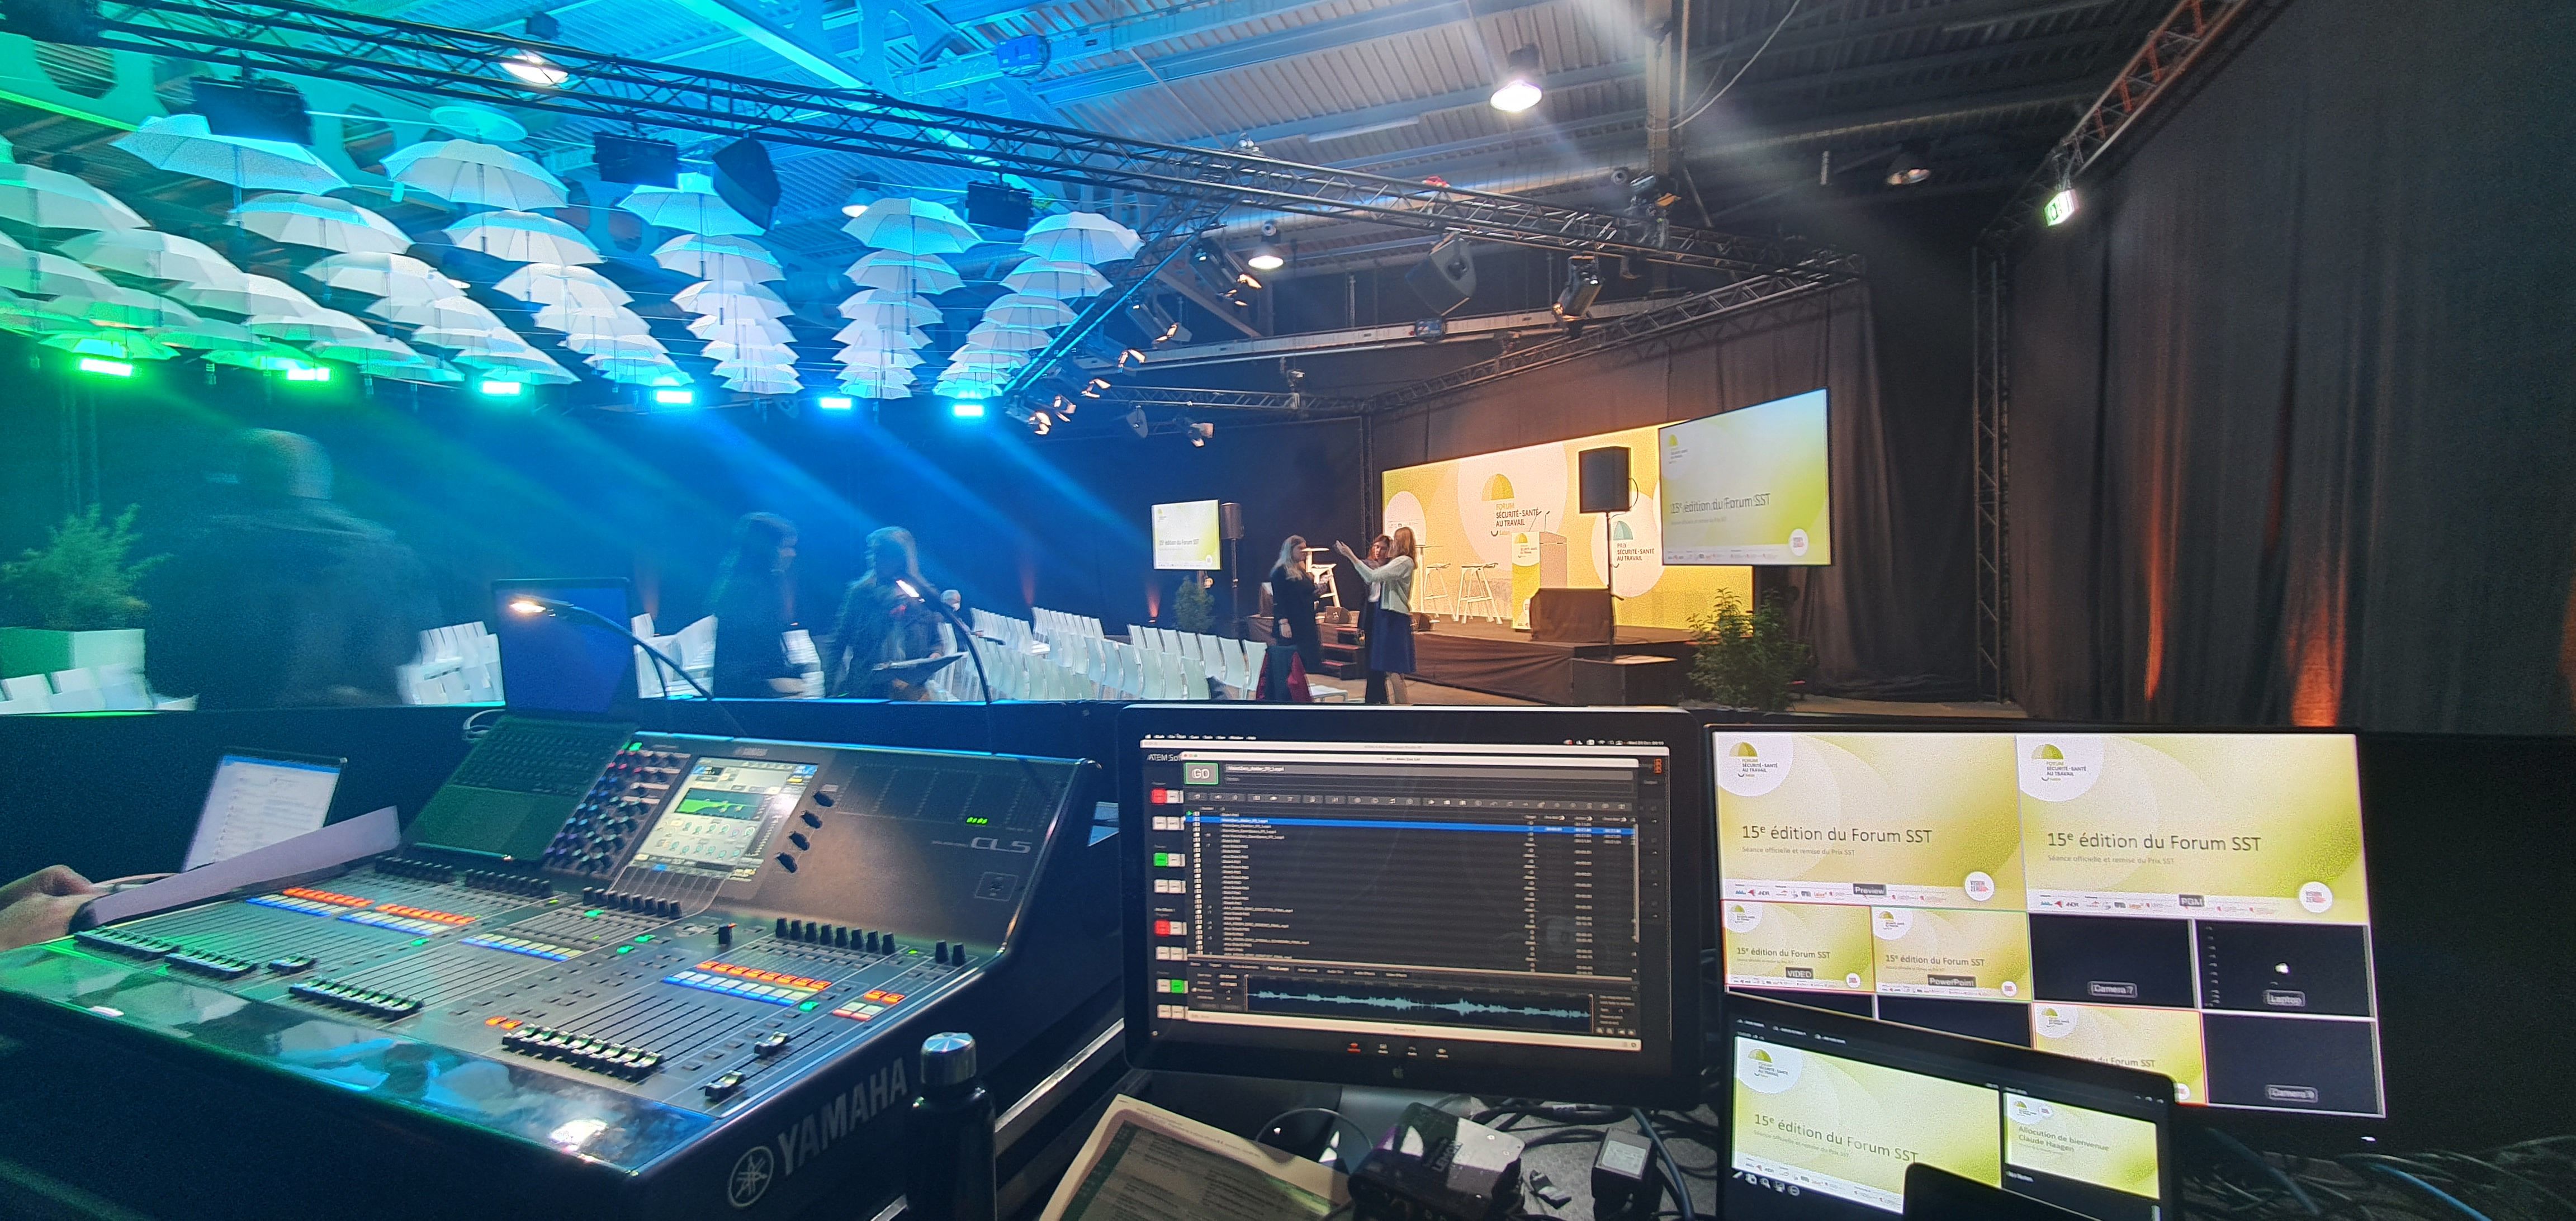 Forum SST 2022. Live stream and live to LED editor, construction team member.